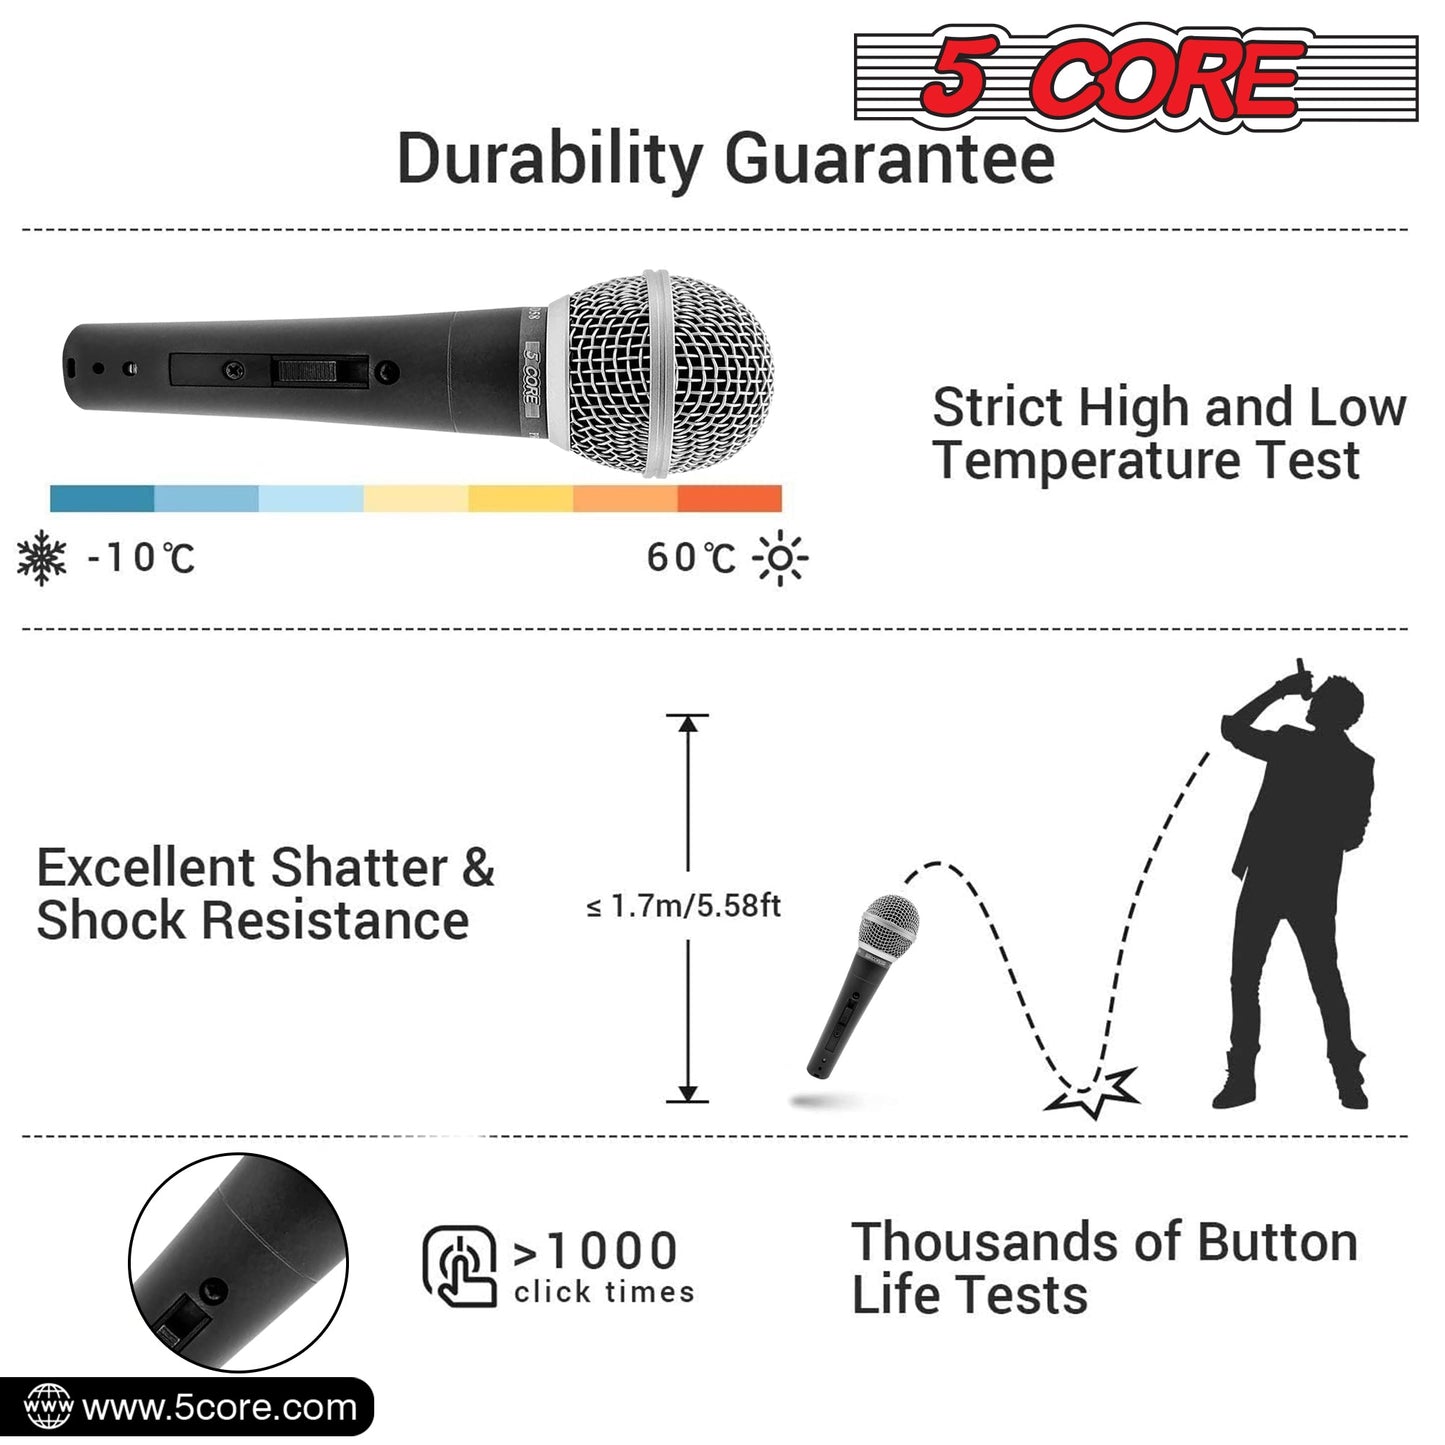 Ultimate Performance Combo: 5 Core Sheet Music Stand with Mic Stand Holder + Premium Vocal Dynamic Mic for Music and Karaoke Delights MUS MH+ND58BLK-16